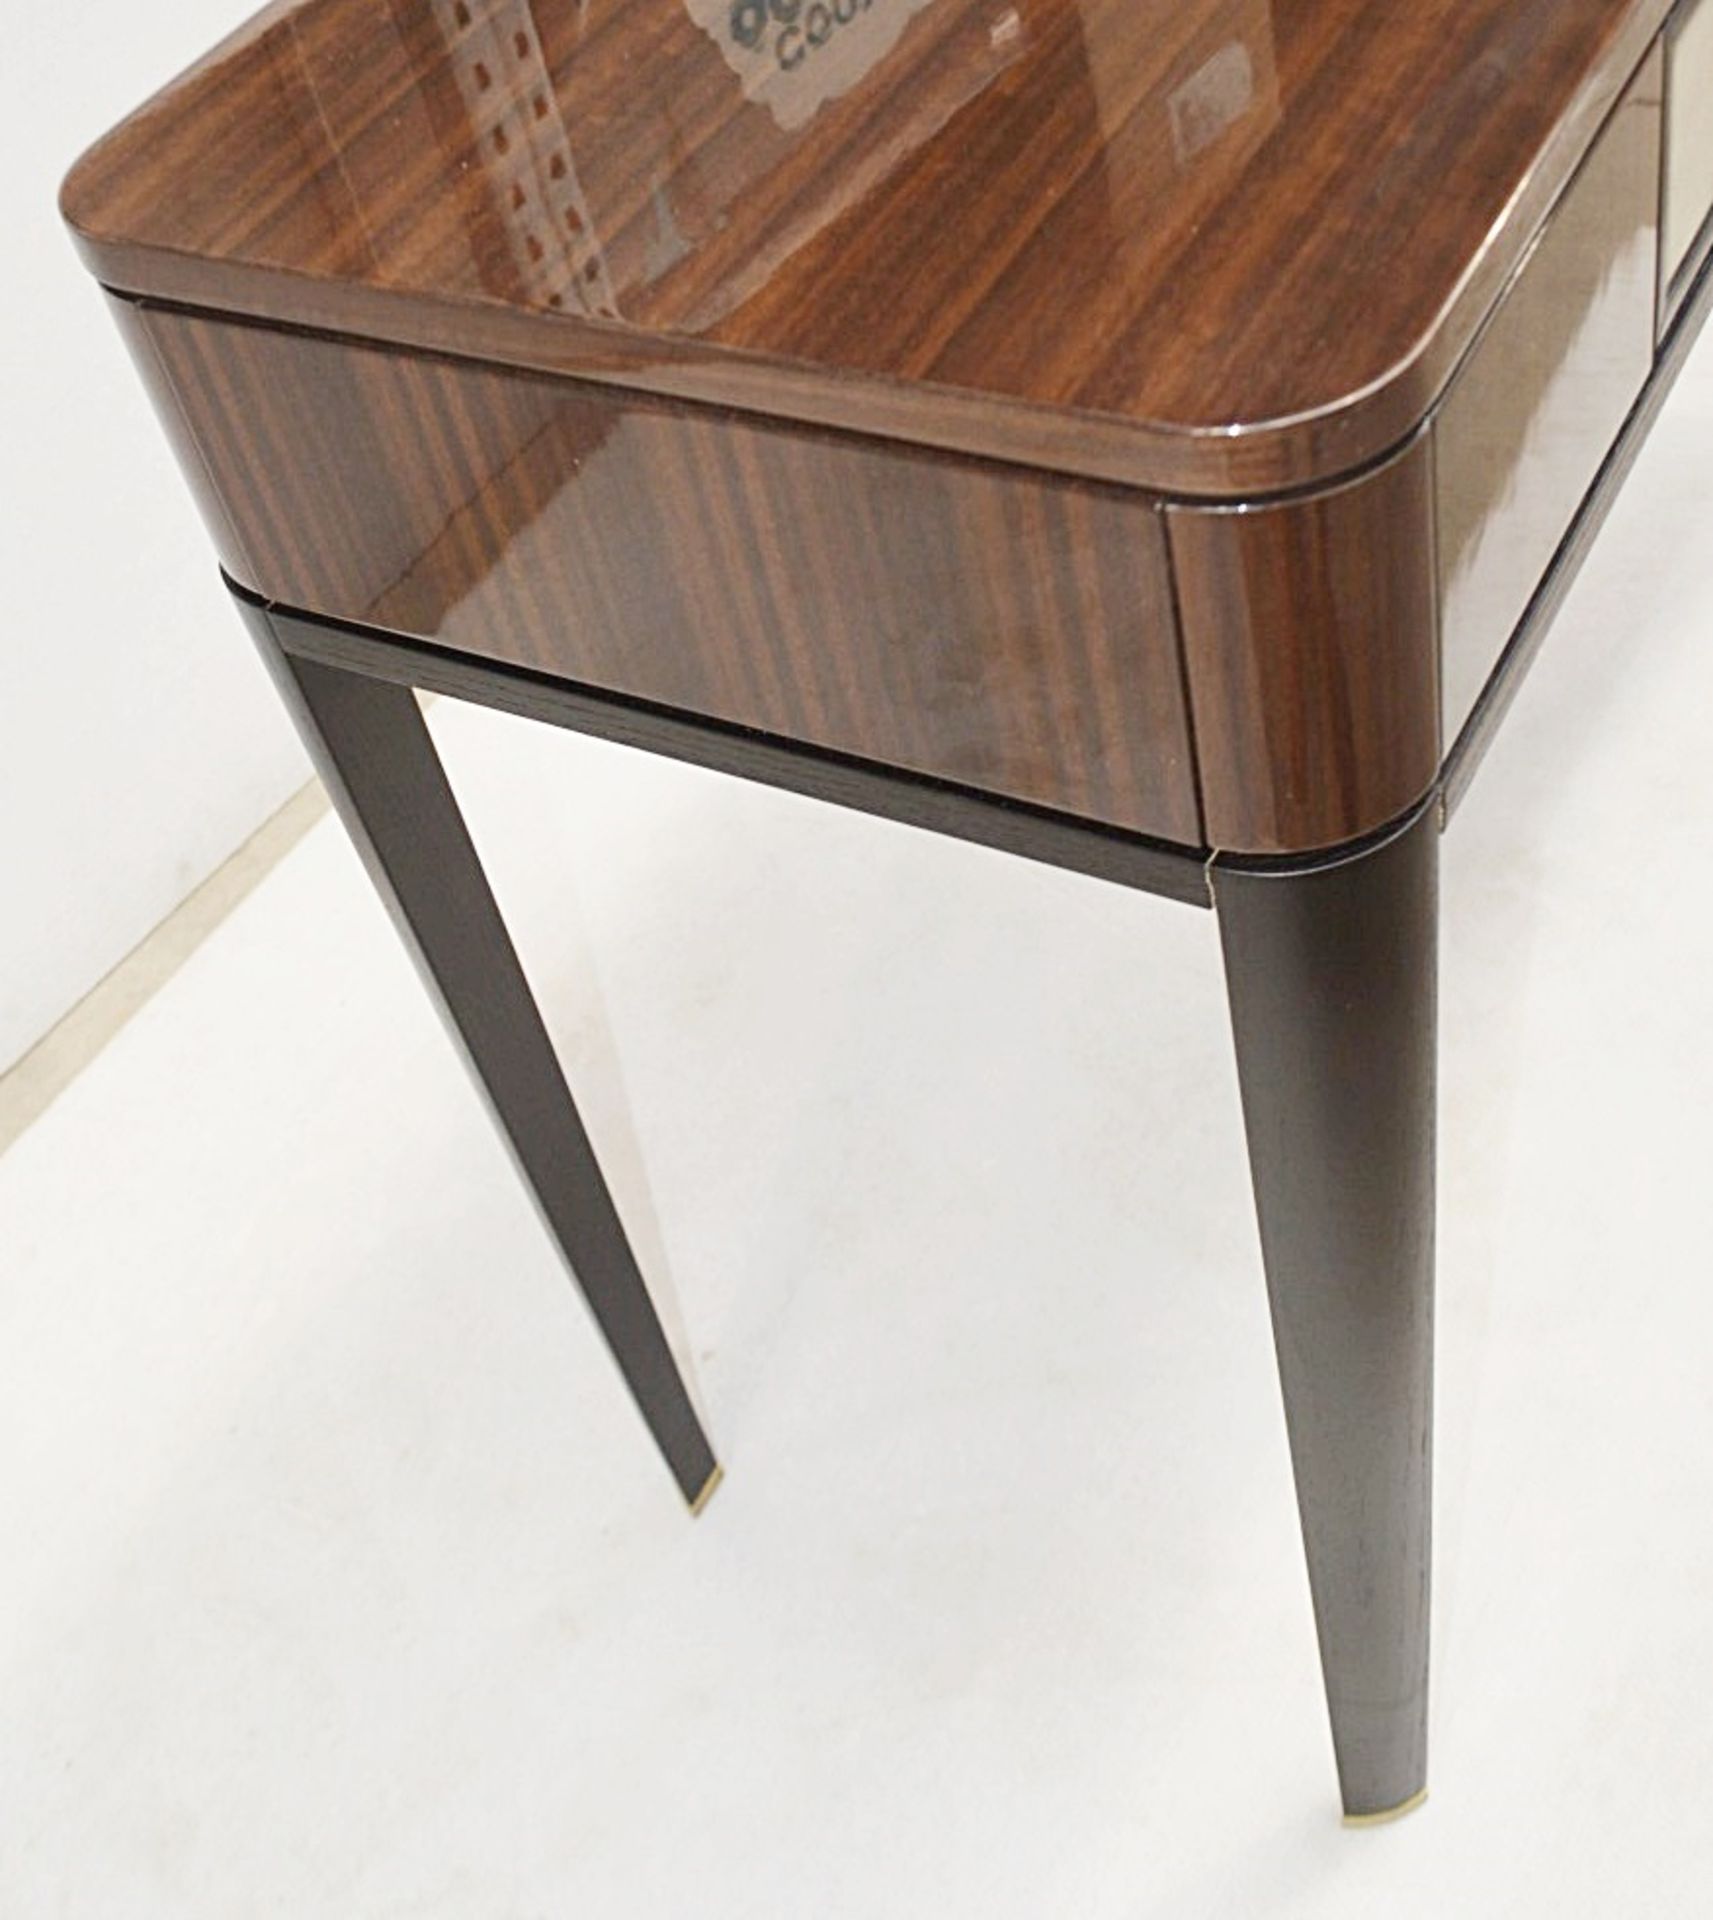 1 x FRATO 'Mandalay' Luxury Designer 2-Drawer Dresser Dressing Table In Brown With A High Gloss Dark - Image 12 of 15